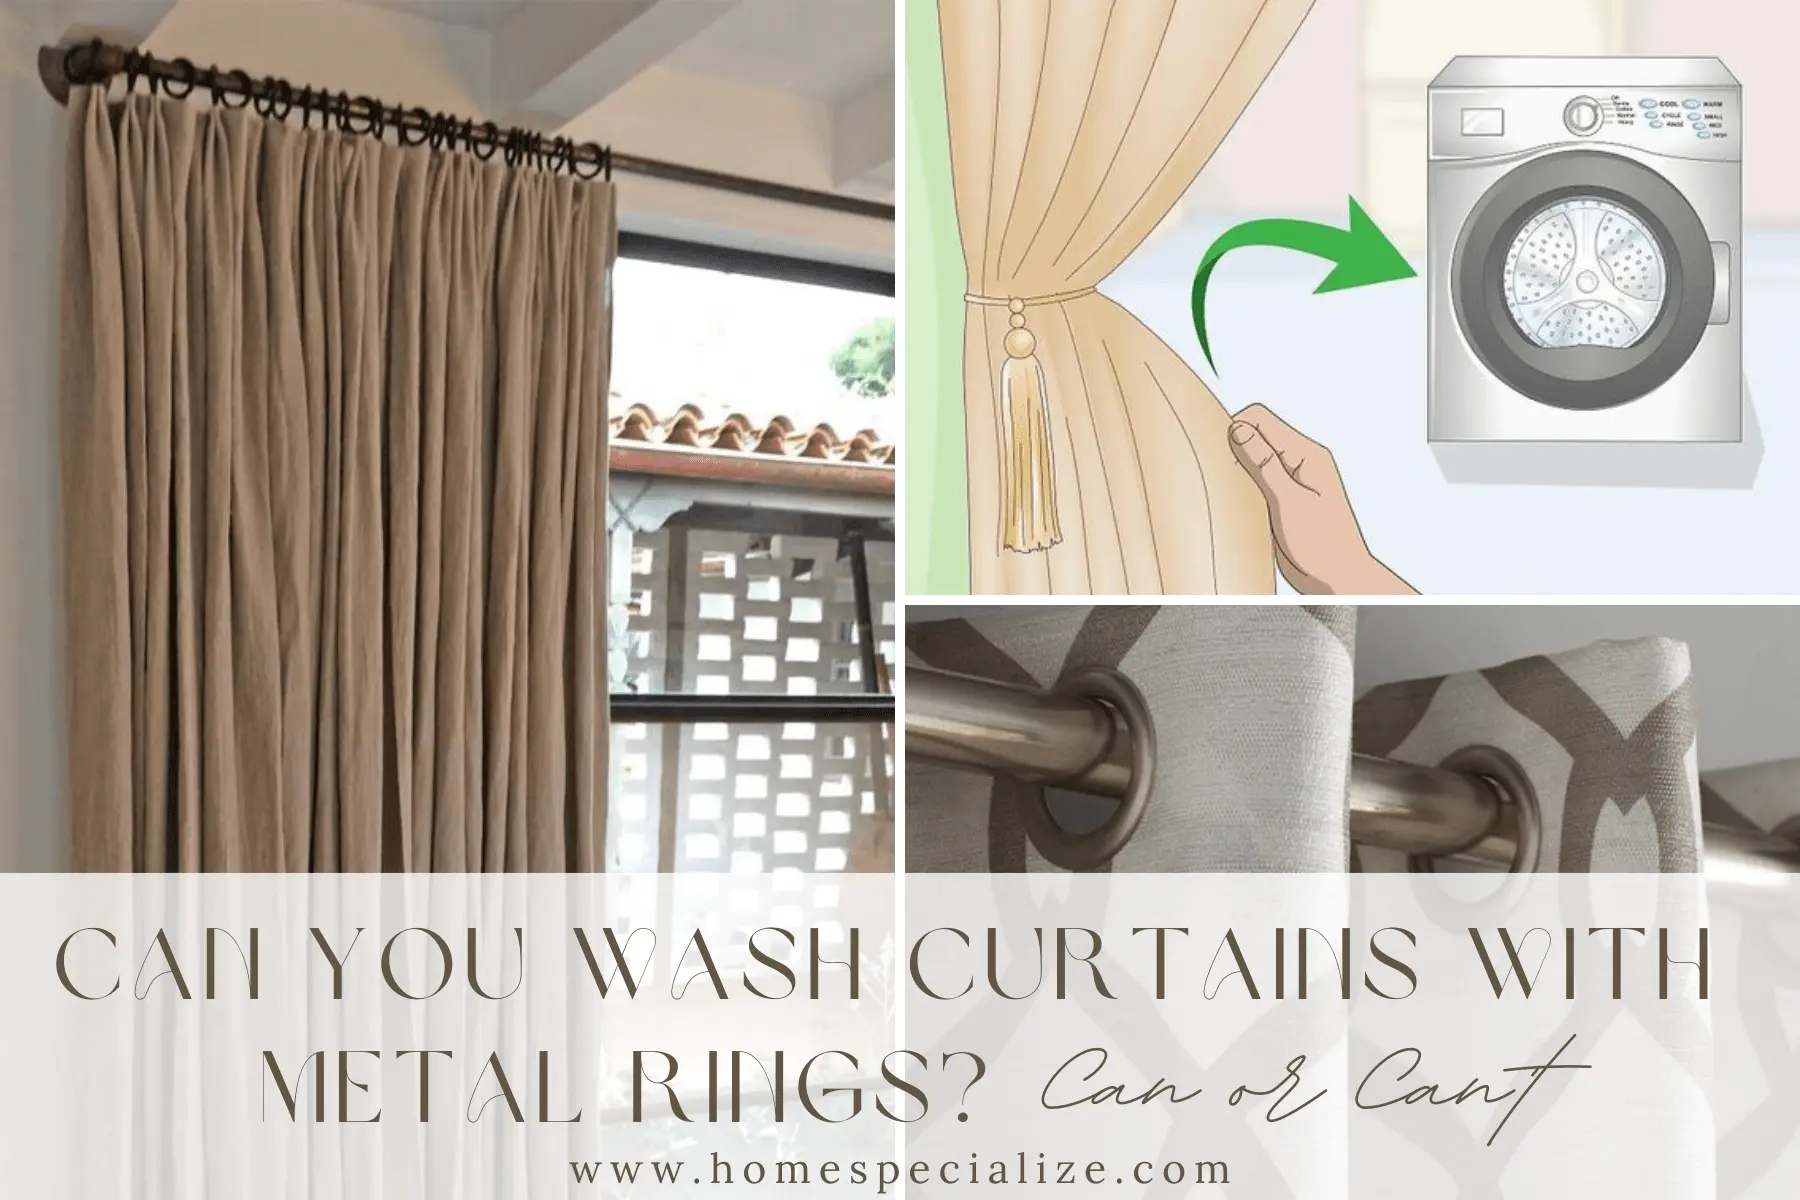 Can You Wash Curtains with Metal Rings